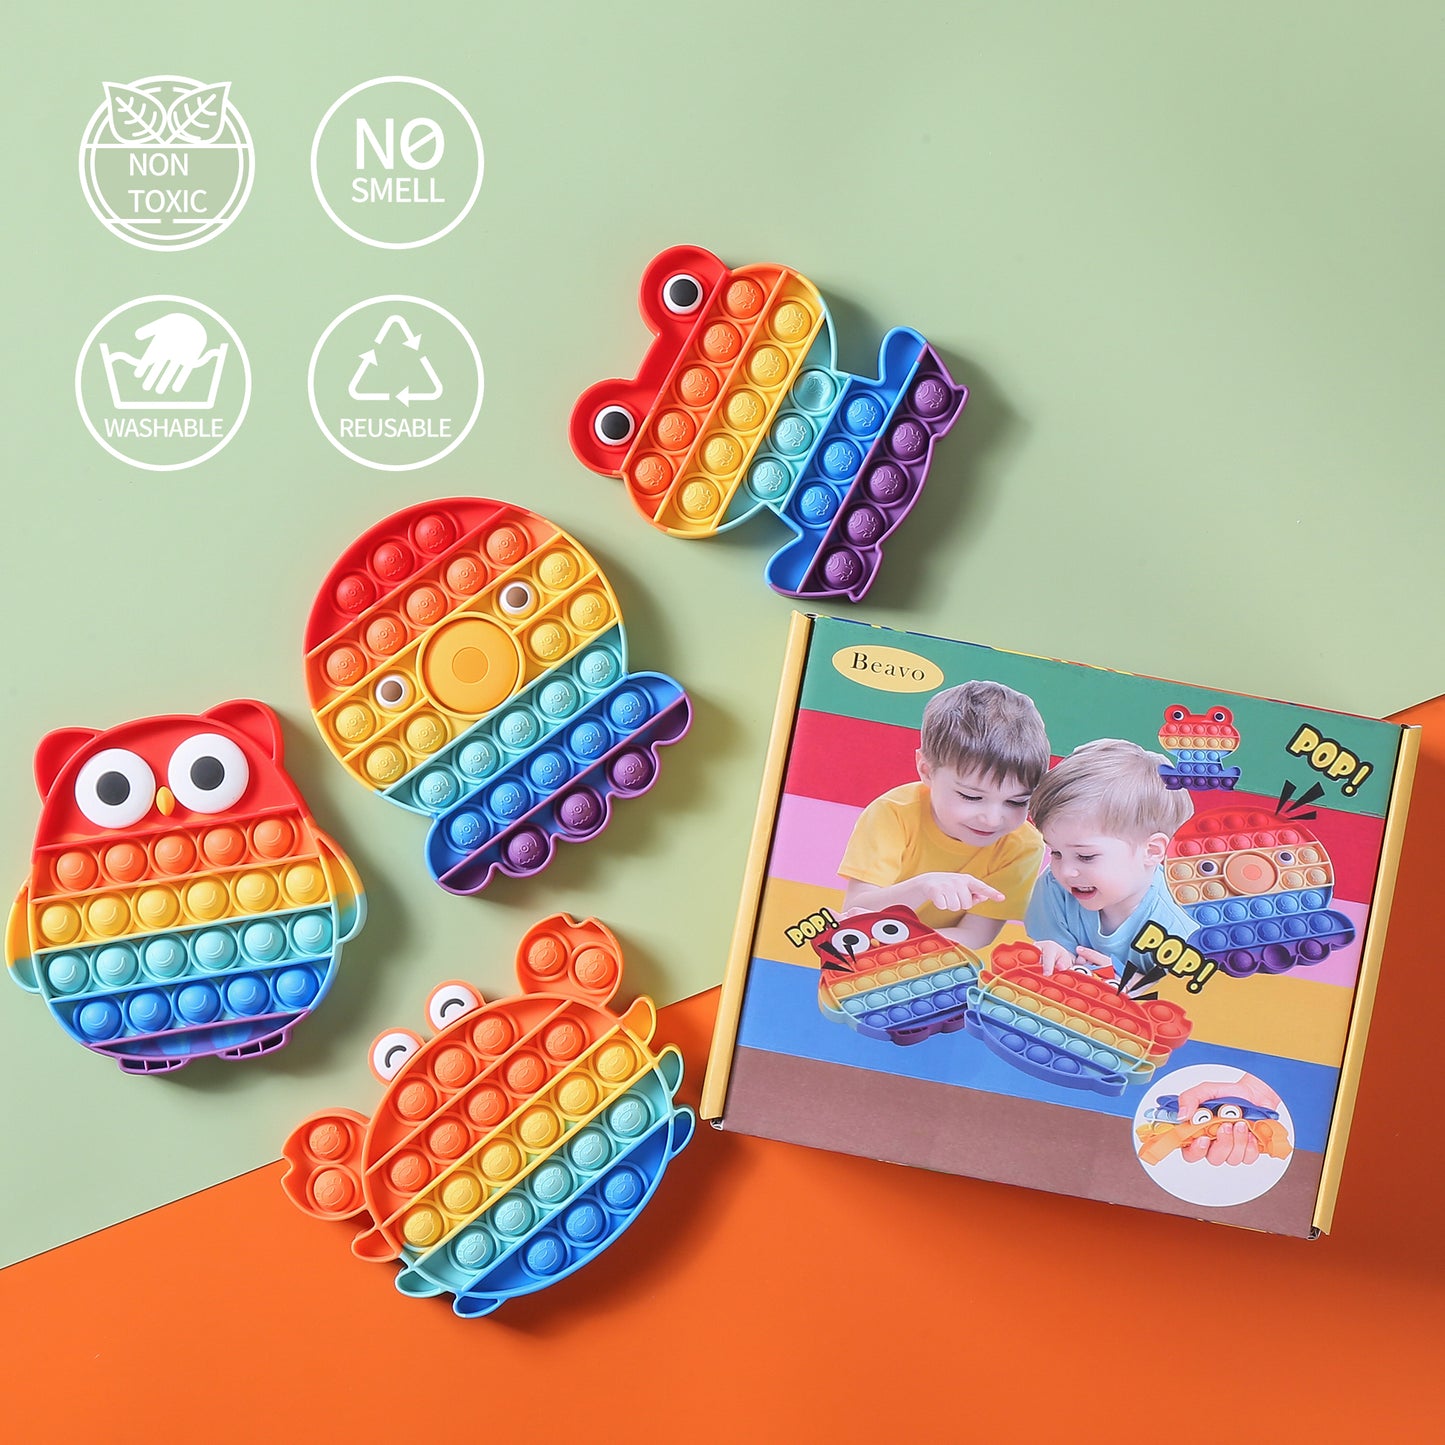 Poppet Fidget Toy Set Push Pop Bubble Sensory Popper Fidget Toy Silicone Rainbow Autism Special Needs Stress Reliever Anxiety Relief Toys Kids Adults(4 Pack Owl,Frog,Crab,Octopus )